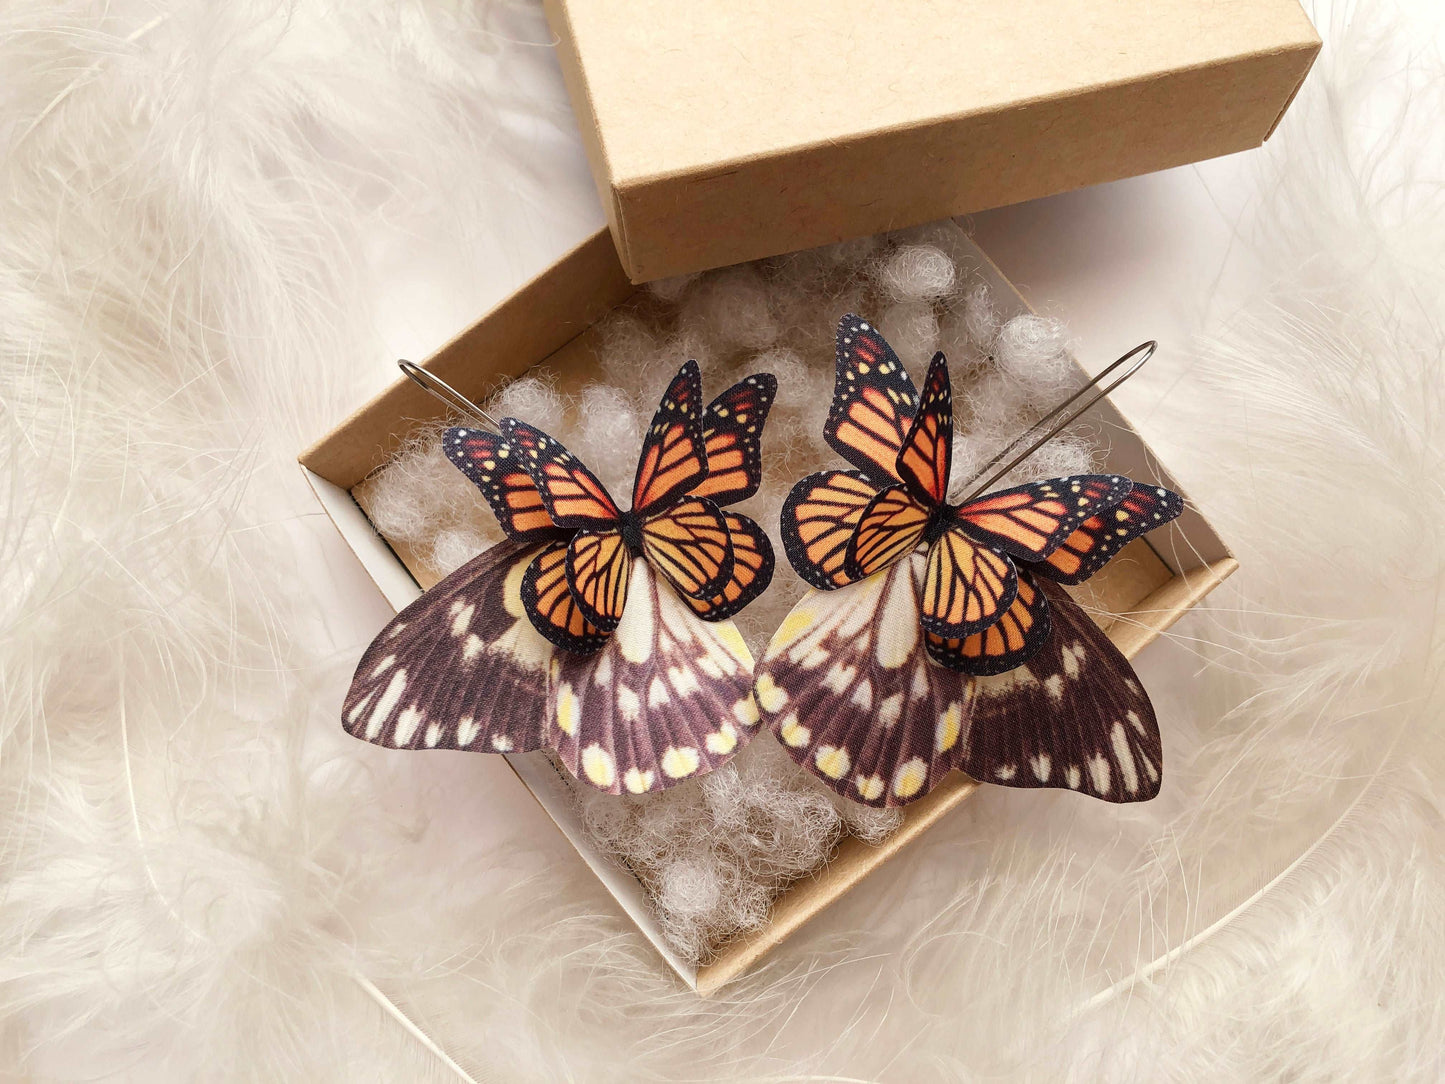 Boho style butterfly earrings in high-quality materials